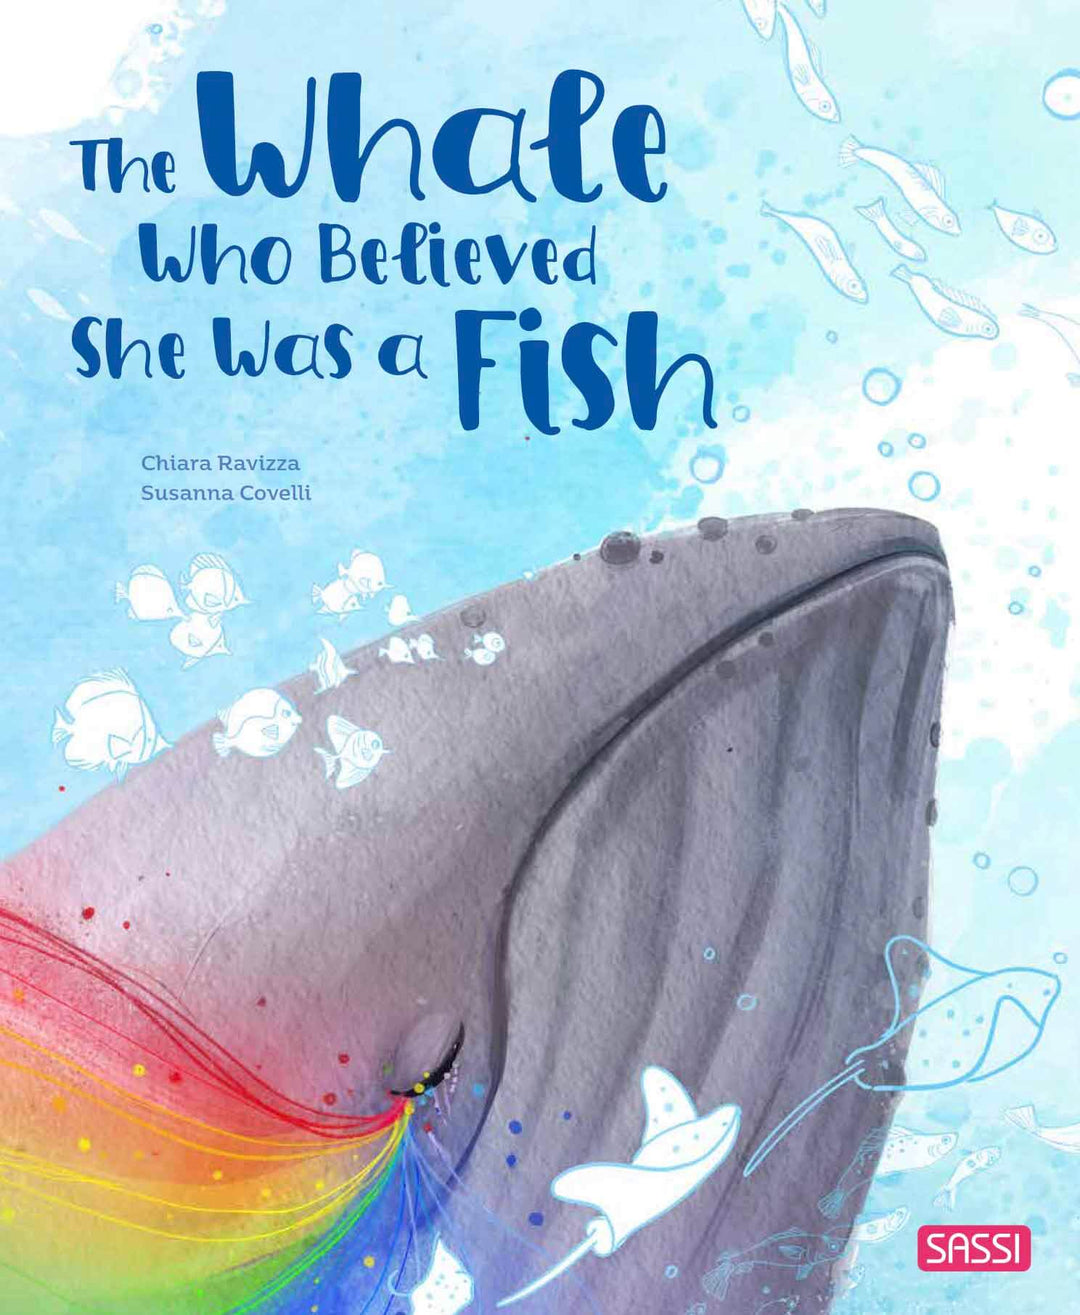 Sassi Story Book - The Whale who believed she was a fish